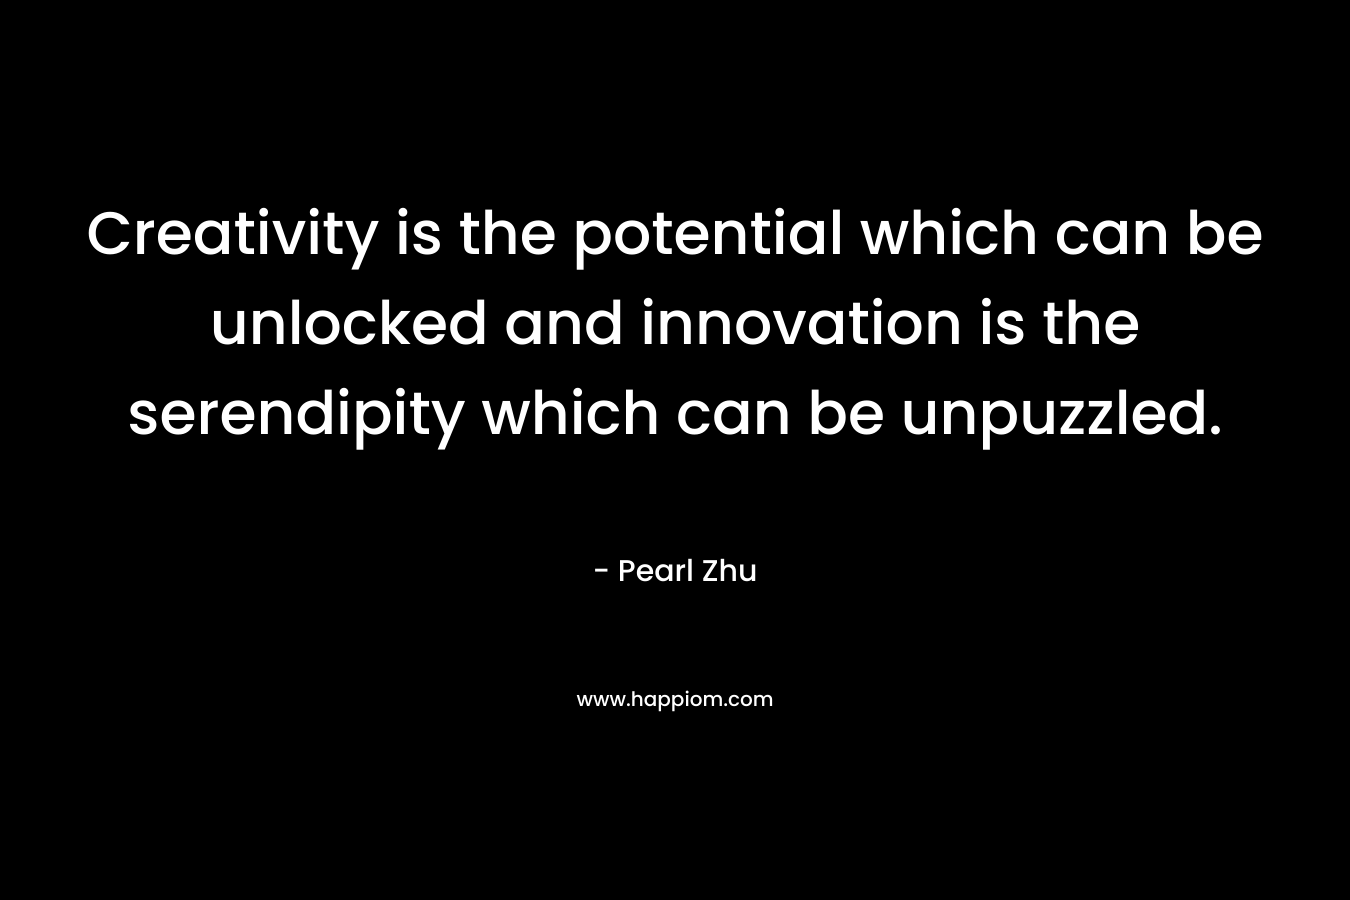 Creativity is the potential which can be unlocked and innovation is the serendipity which can be unpuzzled. – Pearl Zhu